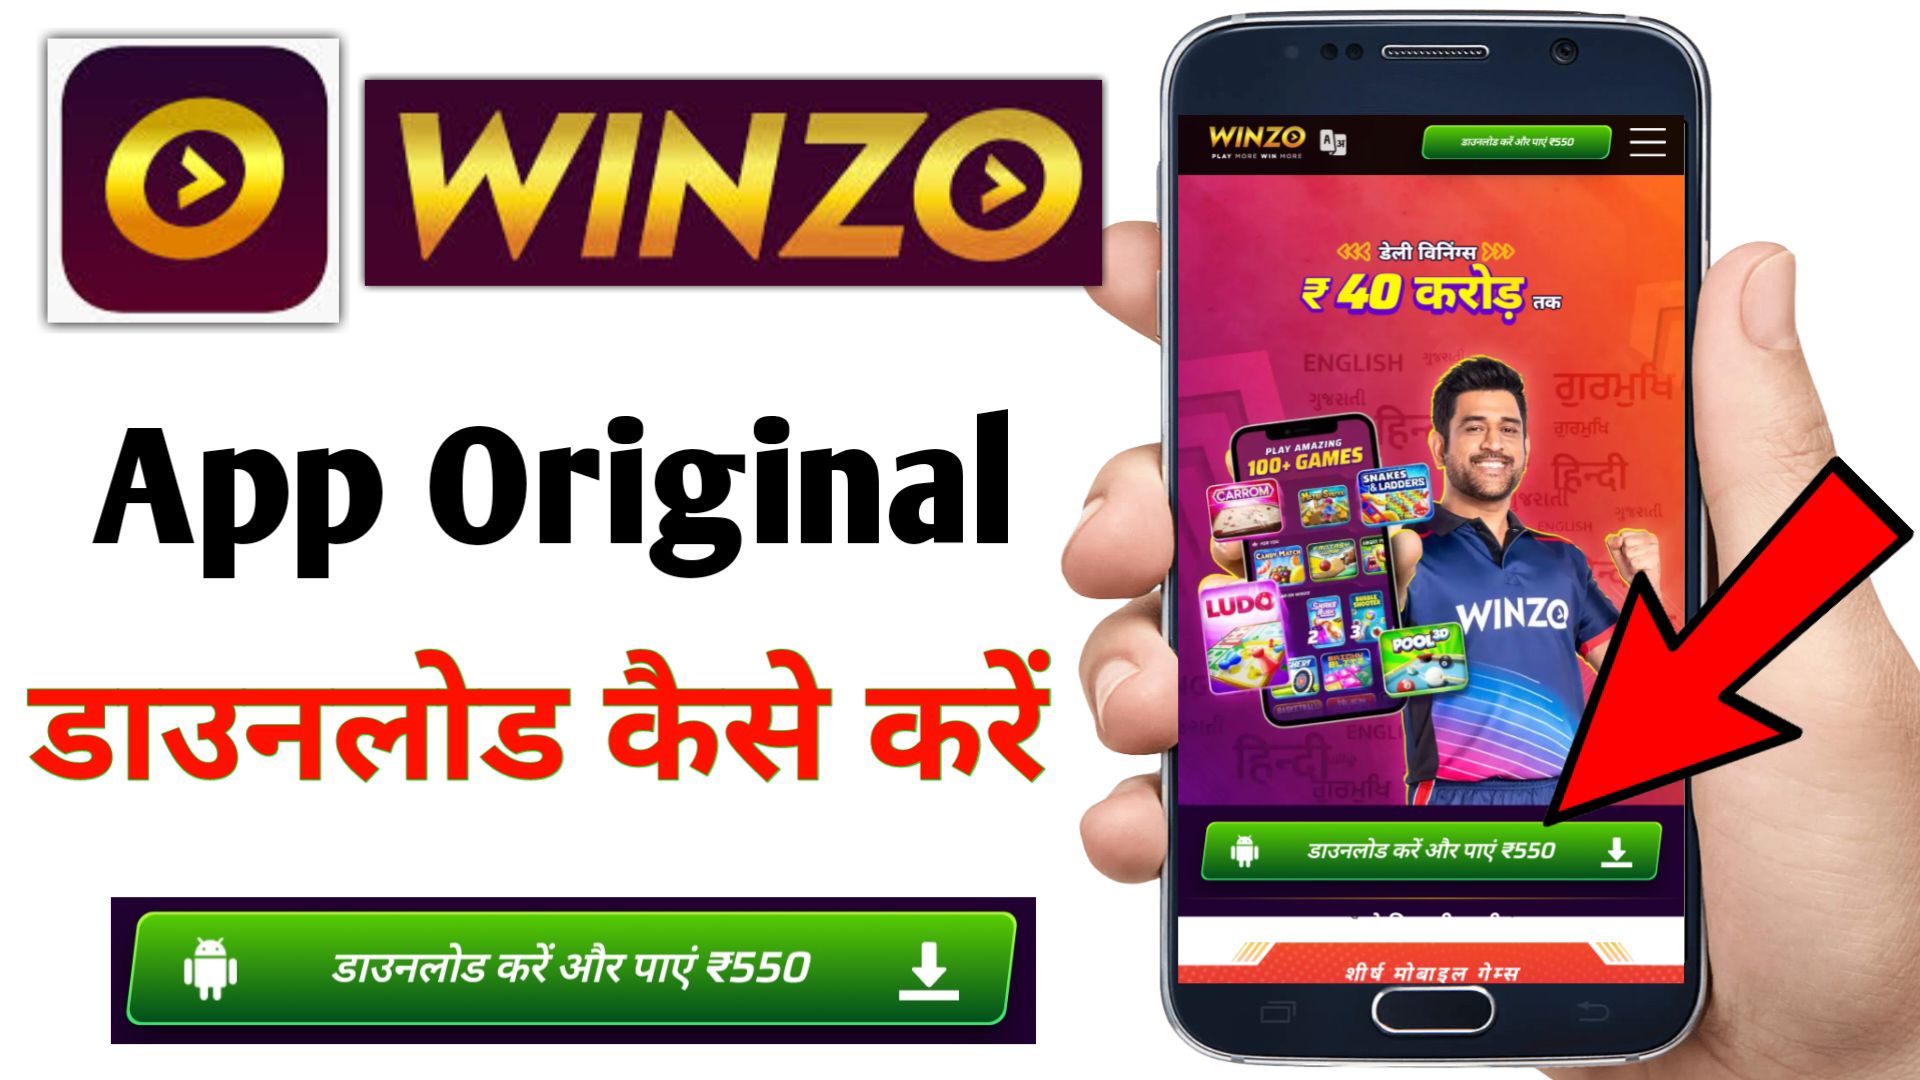 Winzo App Download Kaise kare/ Android Phone